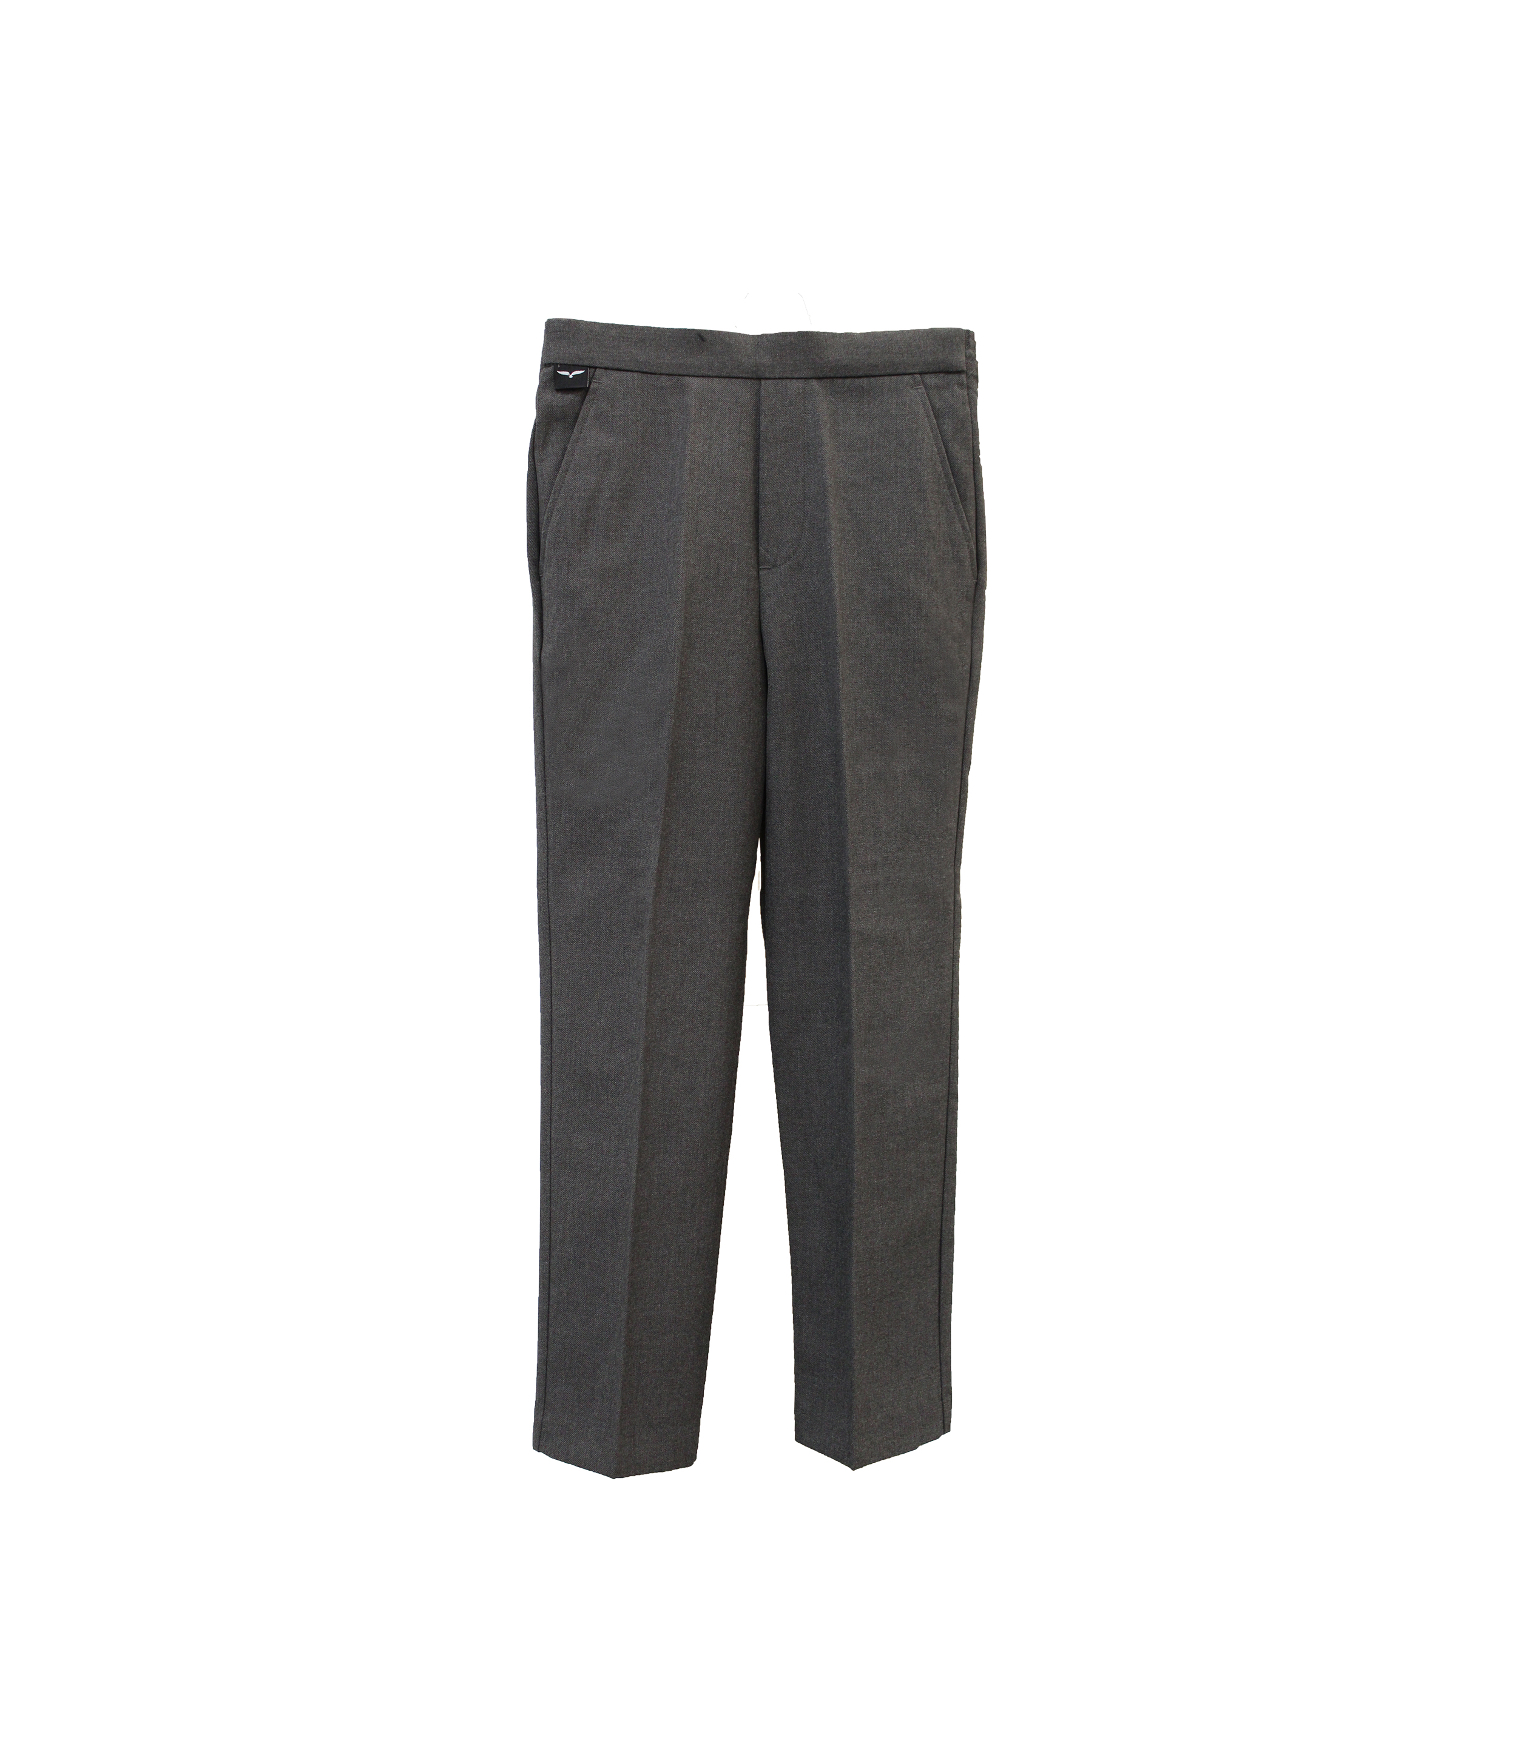 Mock Fly - Primary School Boys Trousers (241) - Grey - Quality